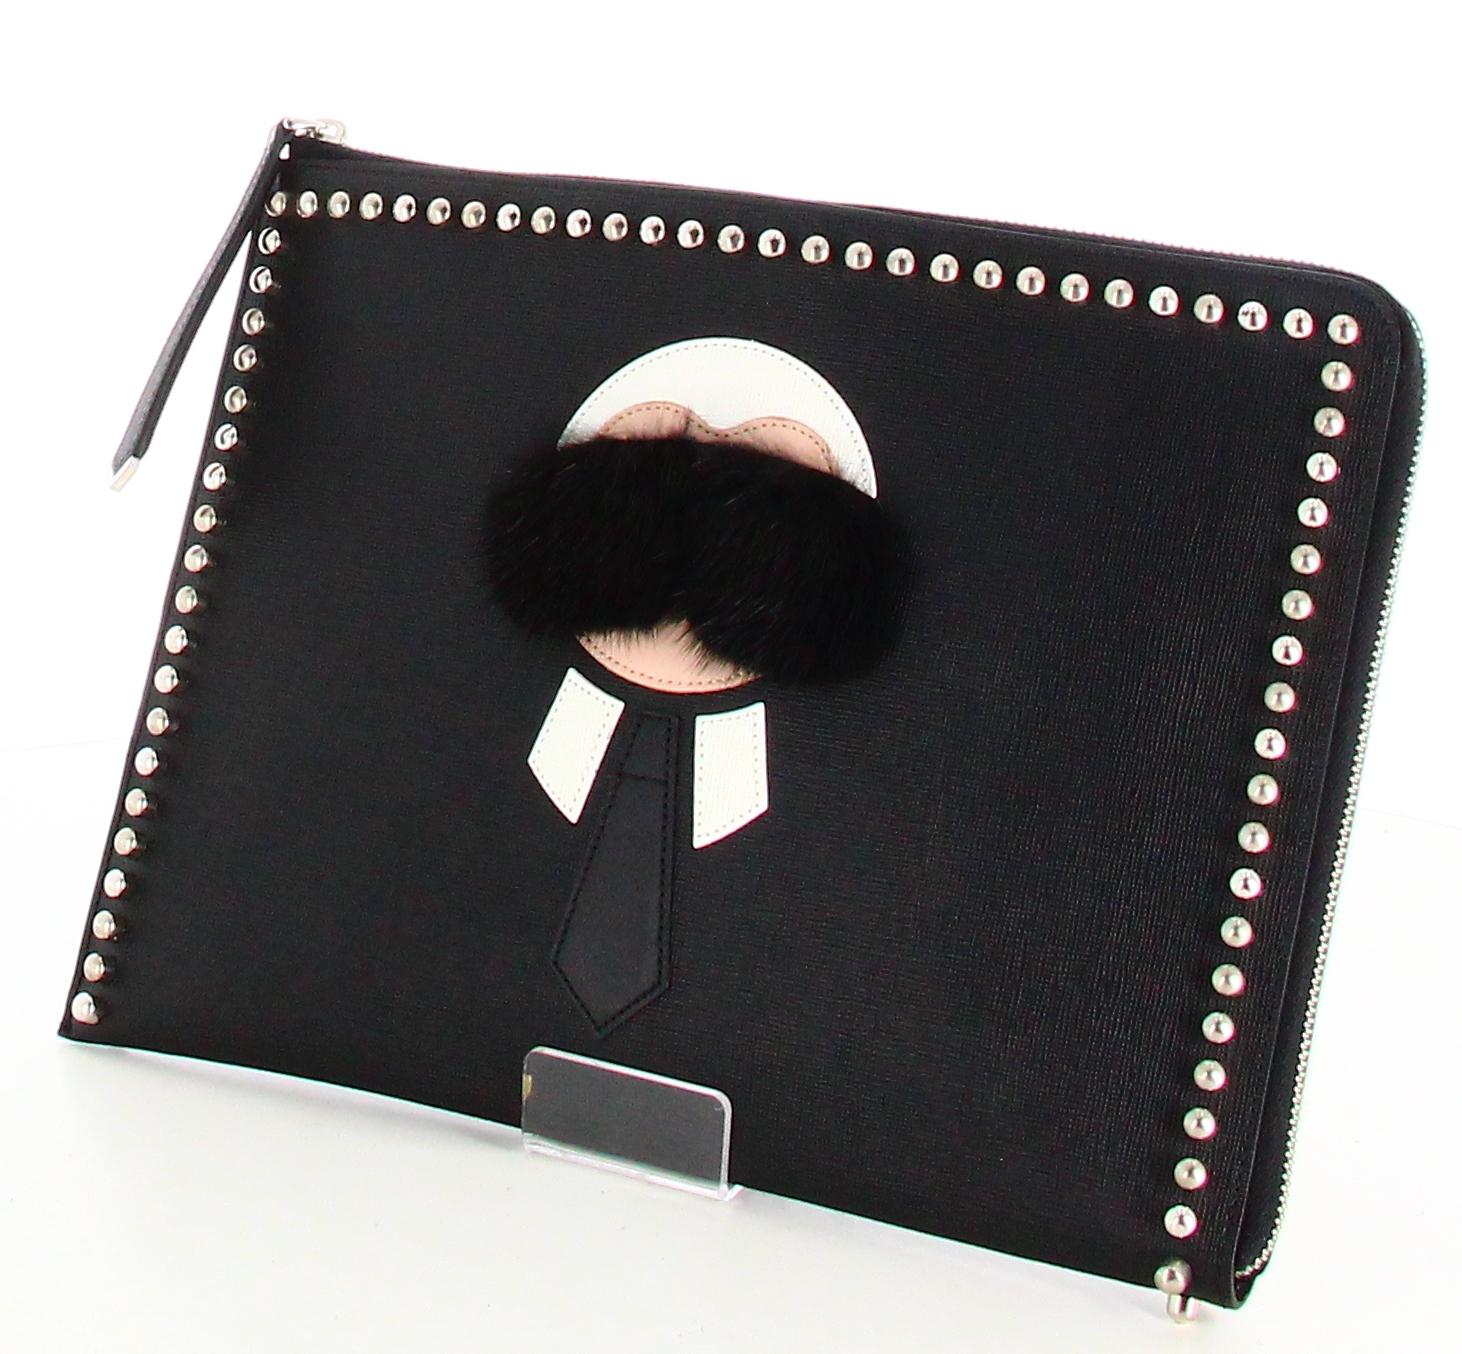 Fendi Karlito Clutch Bag Black Leather 

- Very good condition. Shows no signs of wear over time. 
- Fendi Clutch Bag Black 
- Black leather 
- Karl Lagerfled face in center
- Clasp: silver zipper